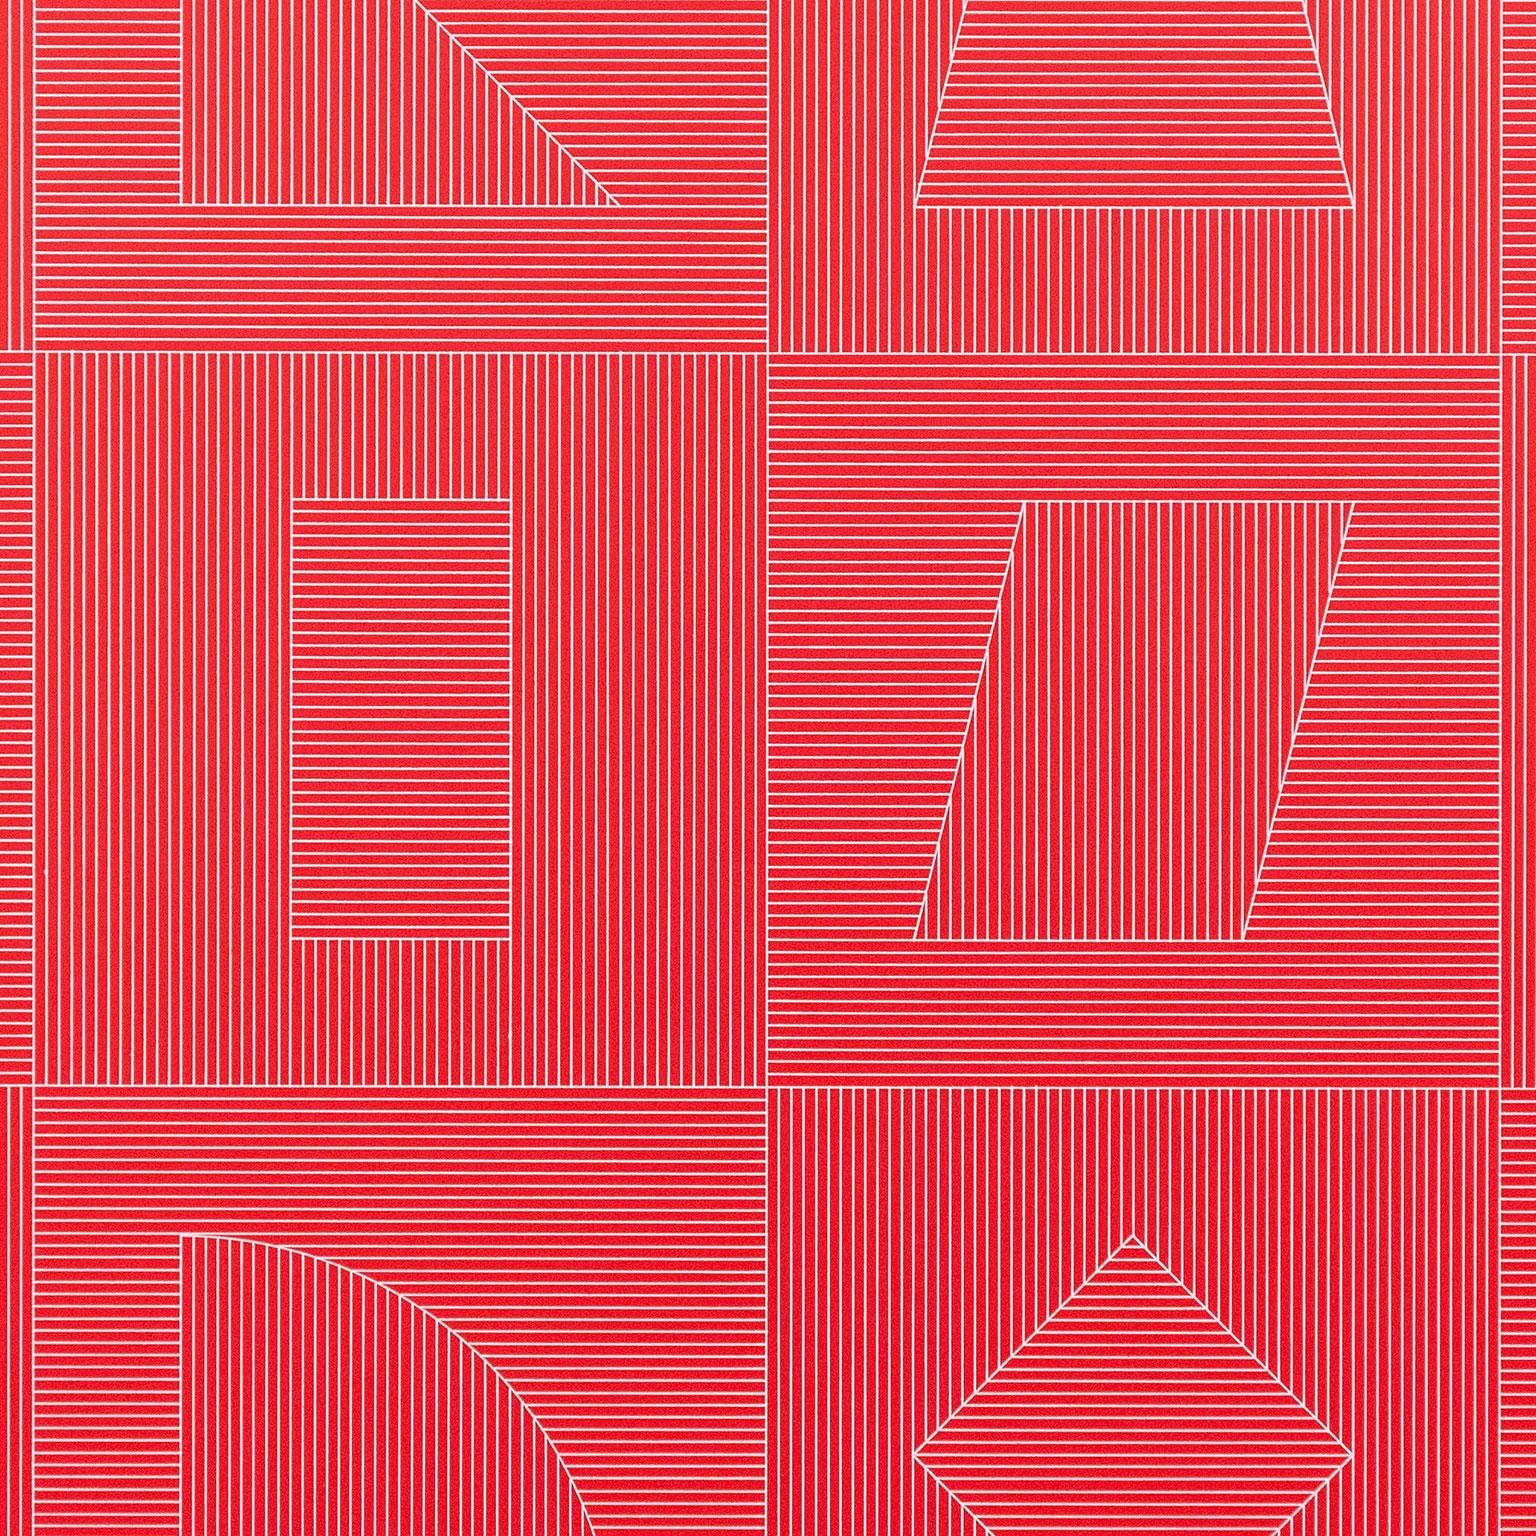 Four Sides of the Tower - Red - Print by Sol LeWitt